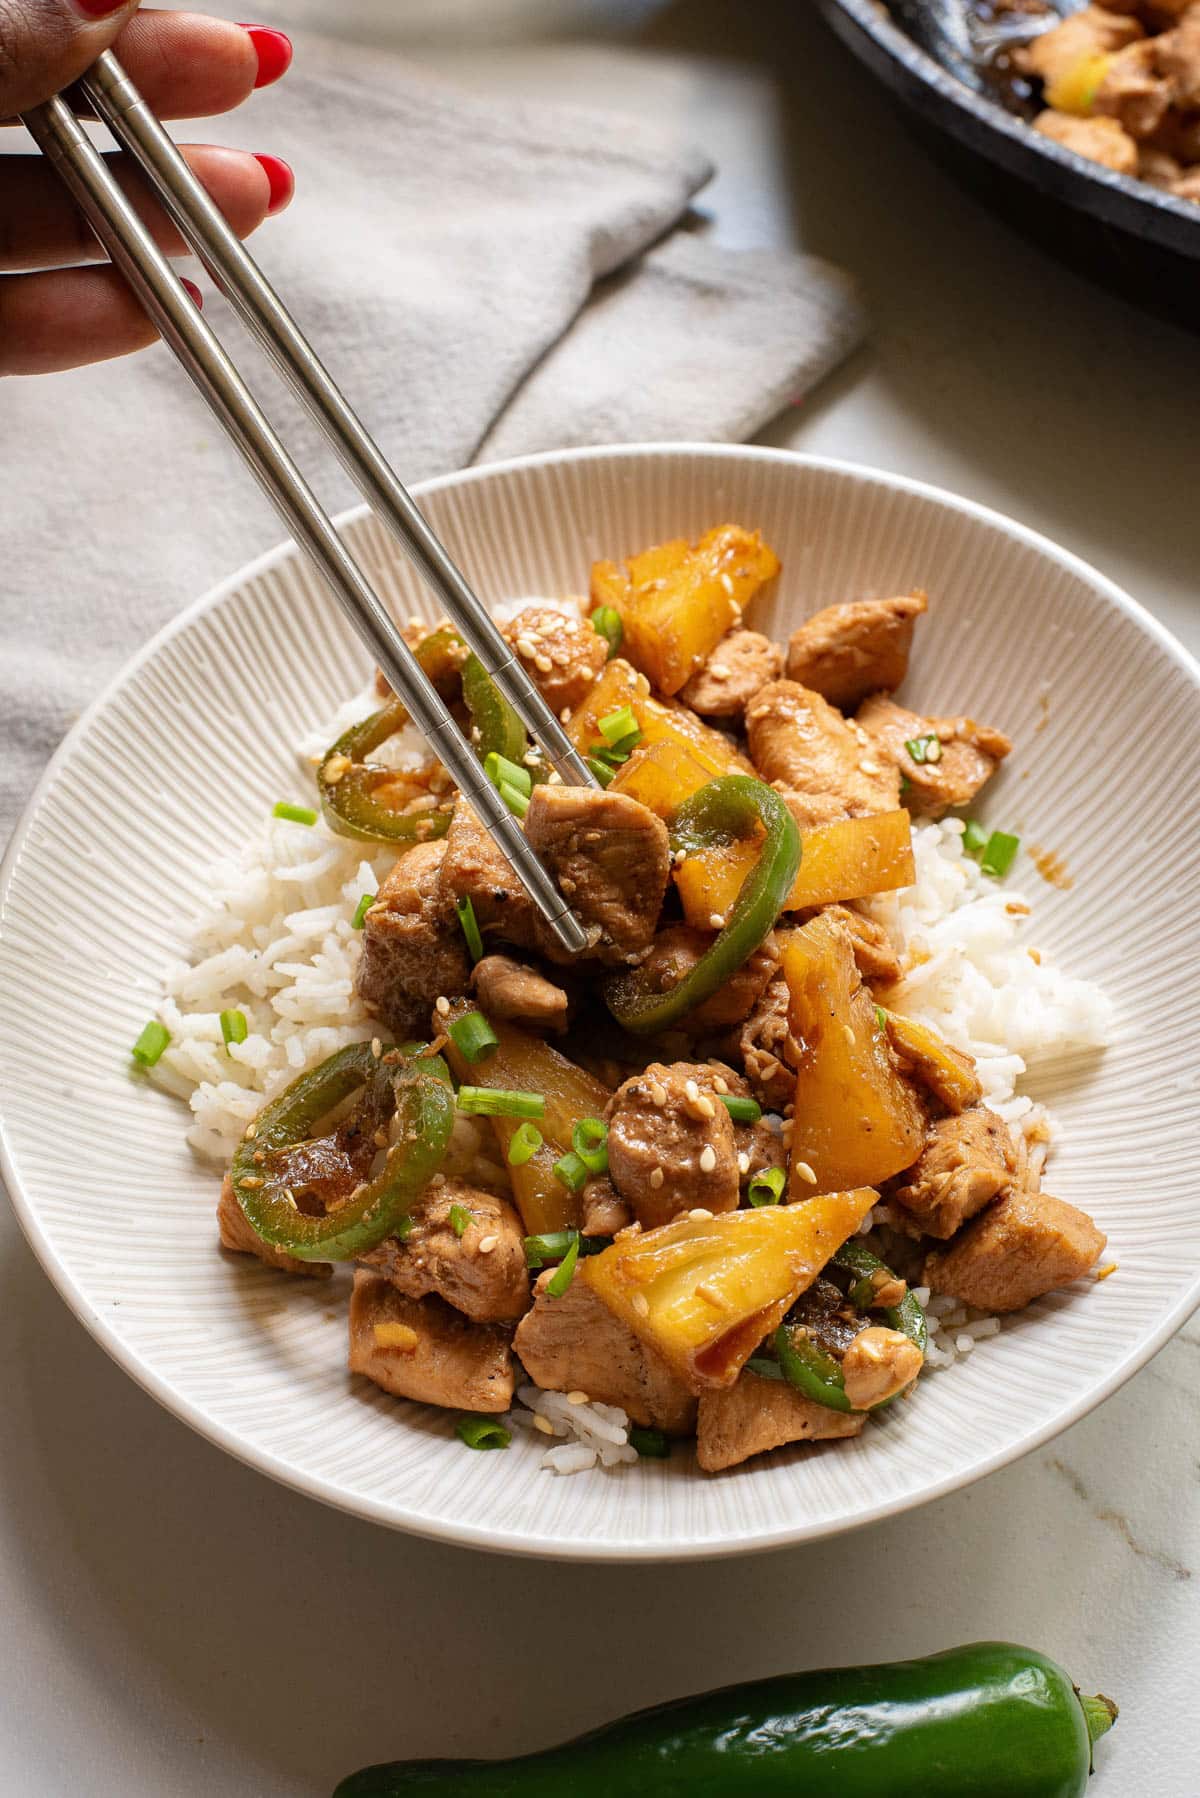 Chicken, pineapple, and jalapenos in sauce over rice.